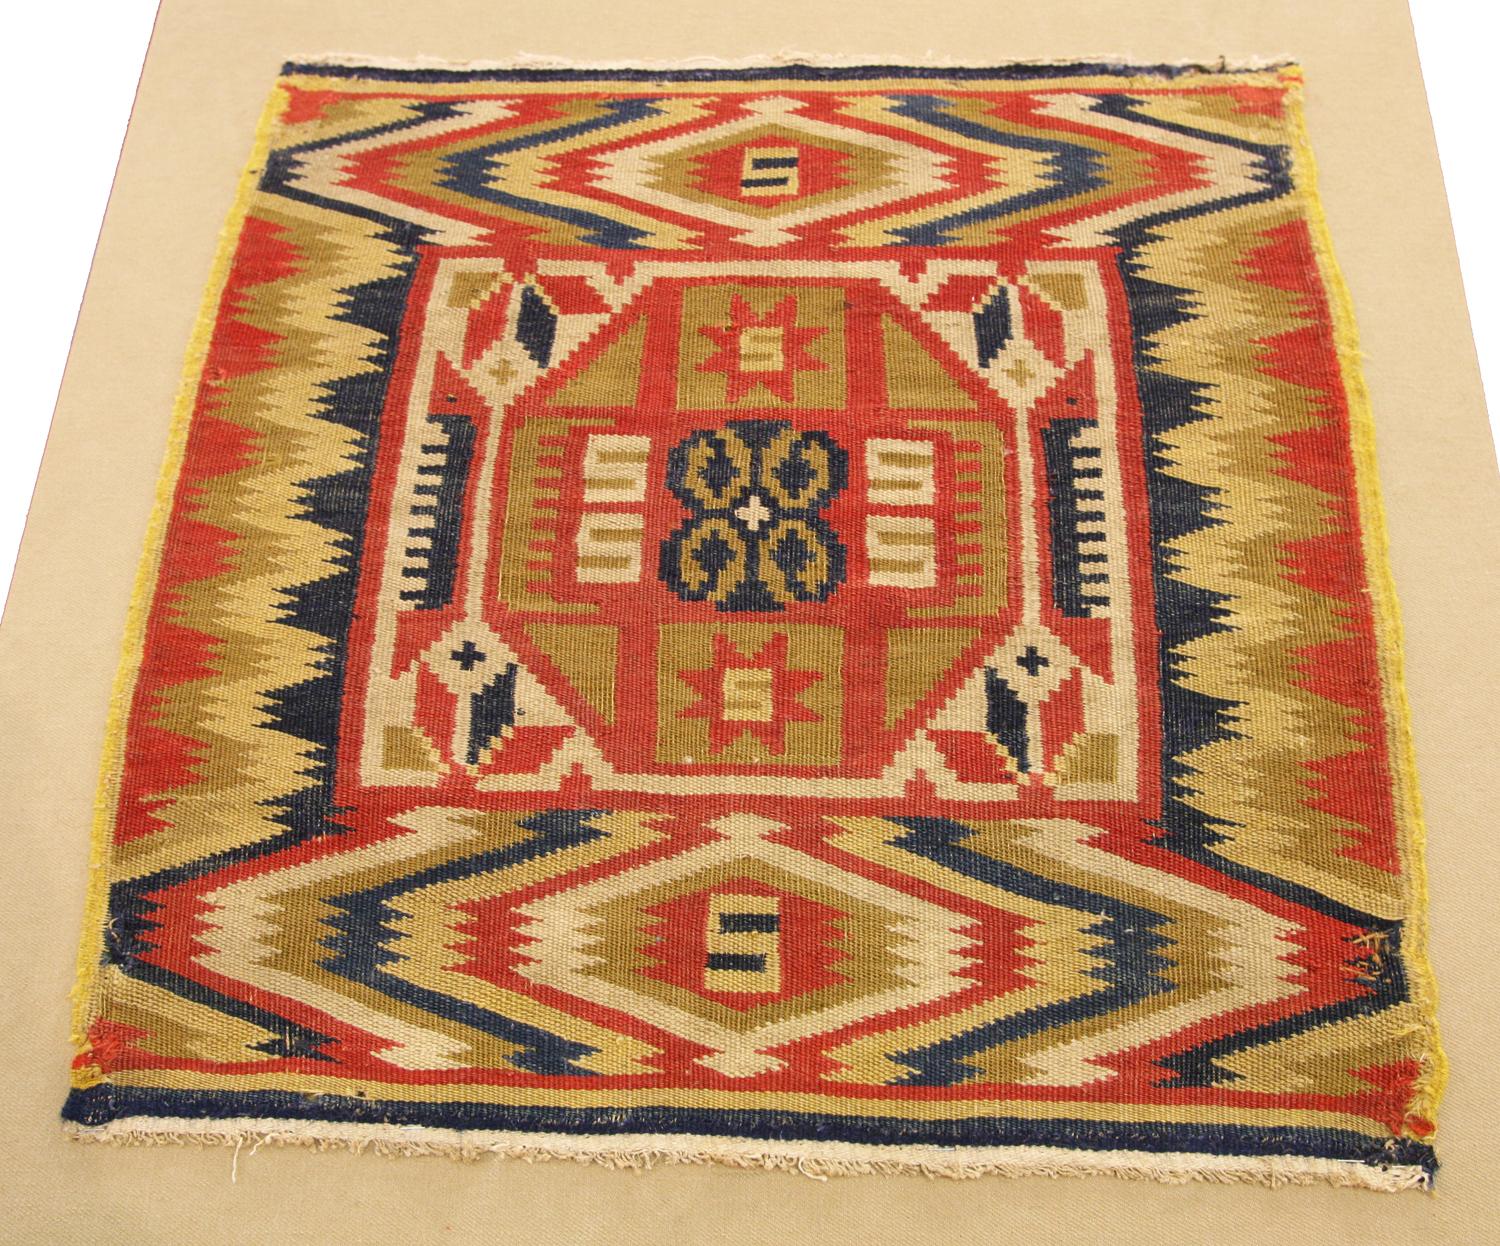 Tan France Auction Pick

This is a Scandinavian Design Swedish Textile Nordic Style woven circa 19th Century and it measures 50 X 50 cm. This fabulous textile is a perfect example of the best principles of northern style - it's gorgeous, practical,